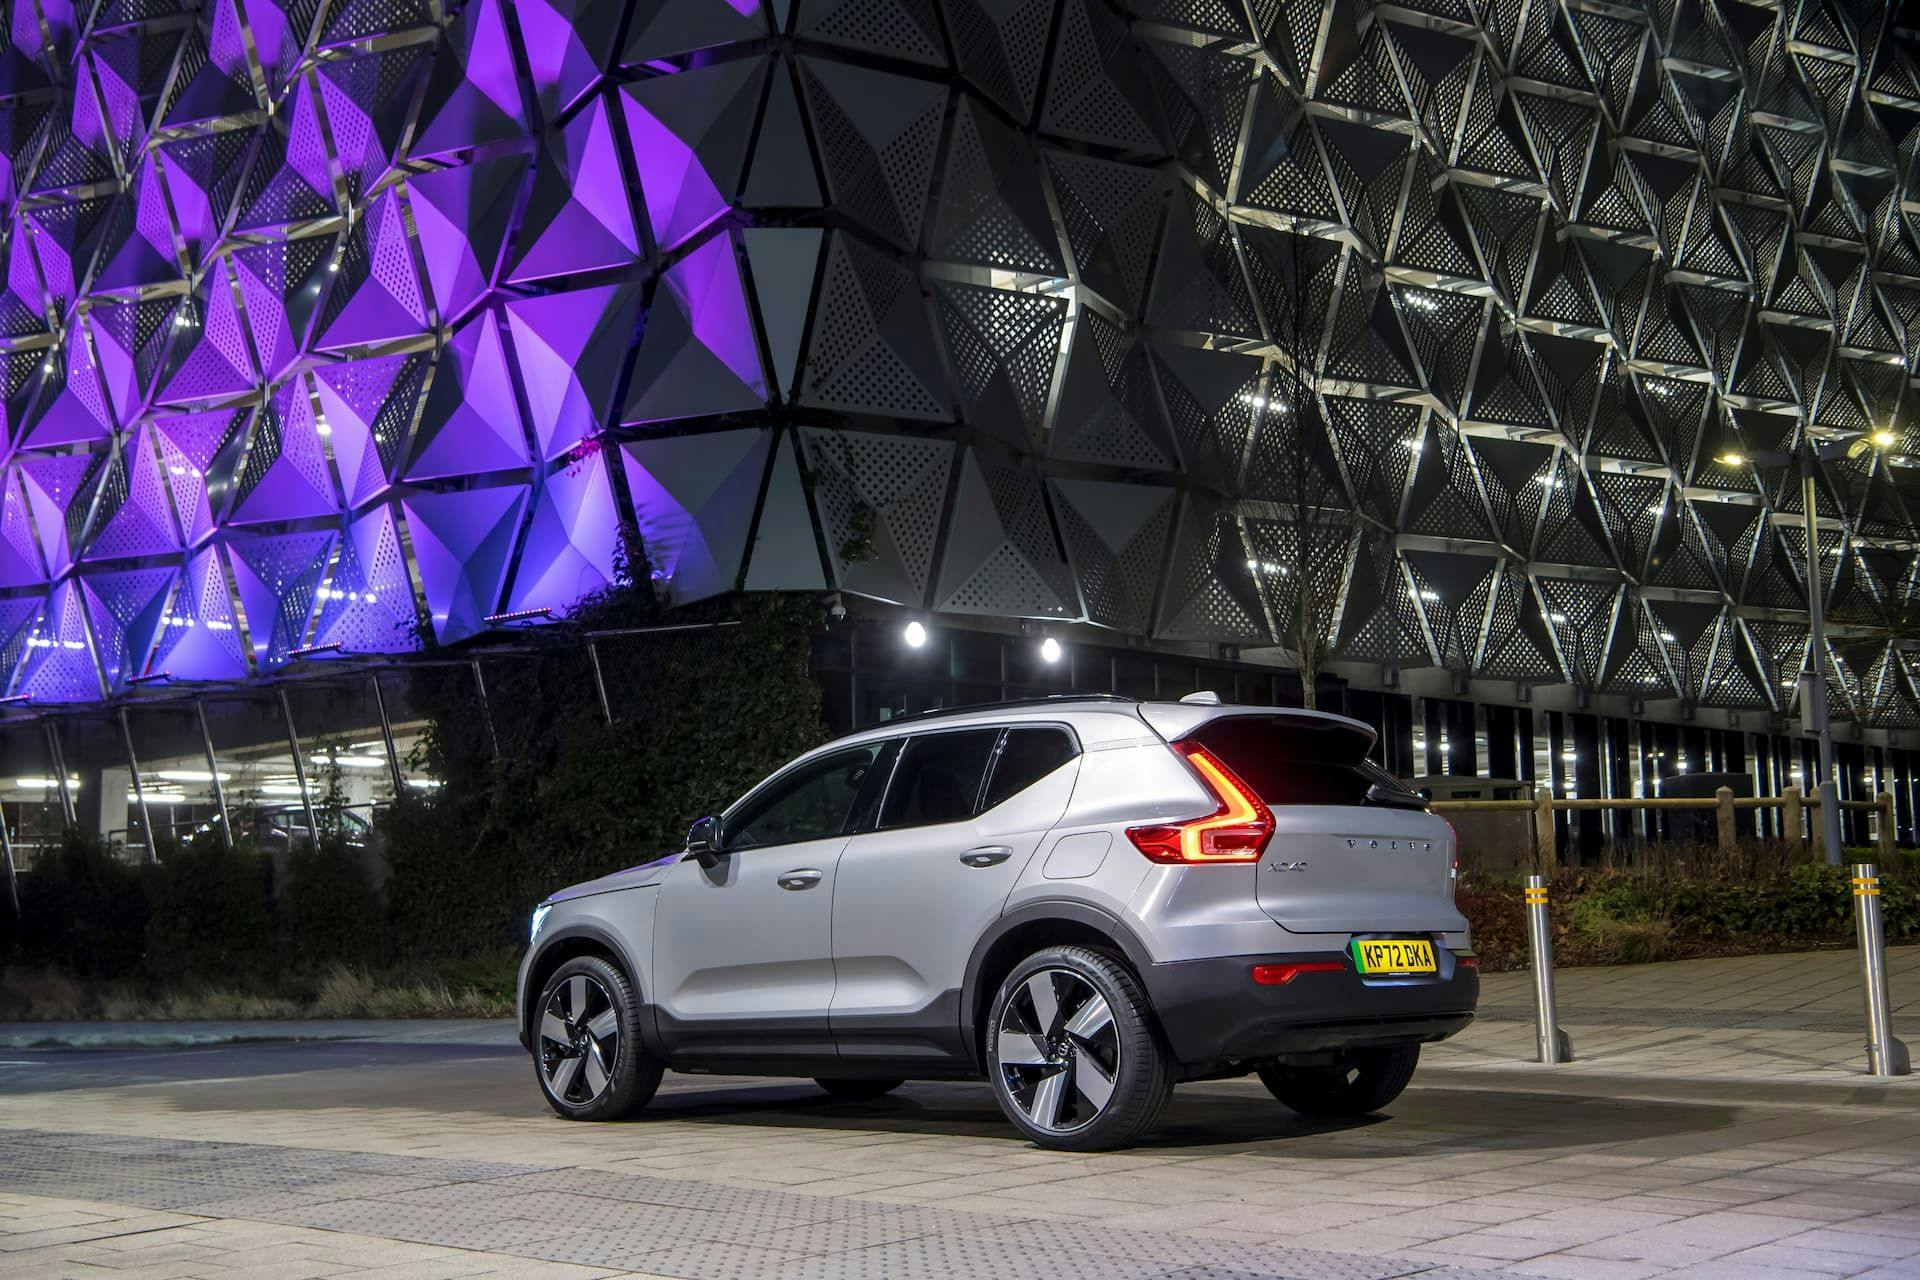 Volvo XC40 Recharge in front of purple building at night rear view